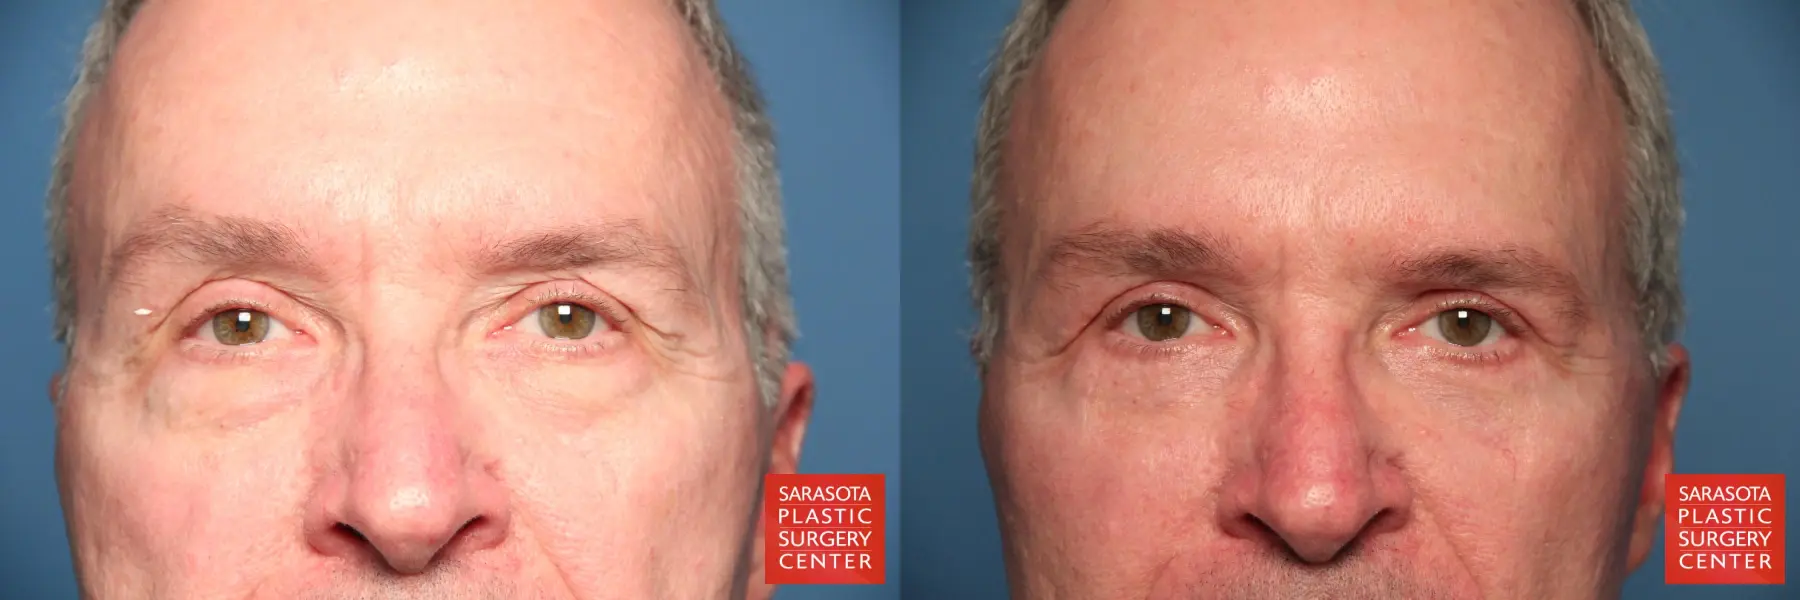 Eyelid-lift-for-men-revision: Patient 1 - Before and After  